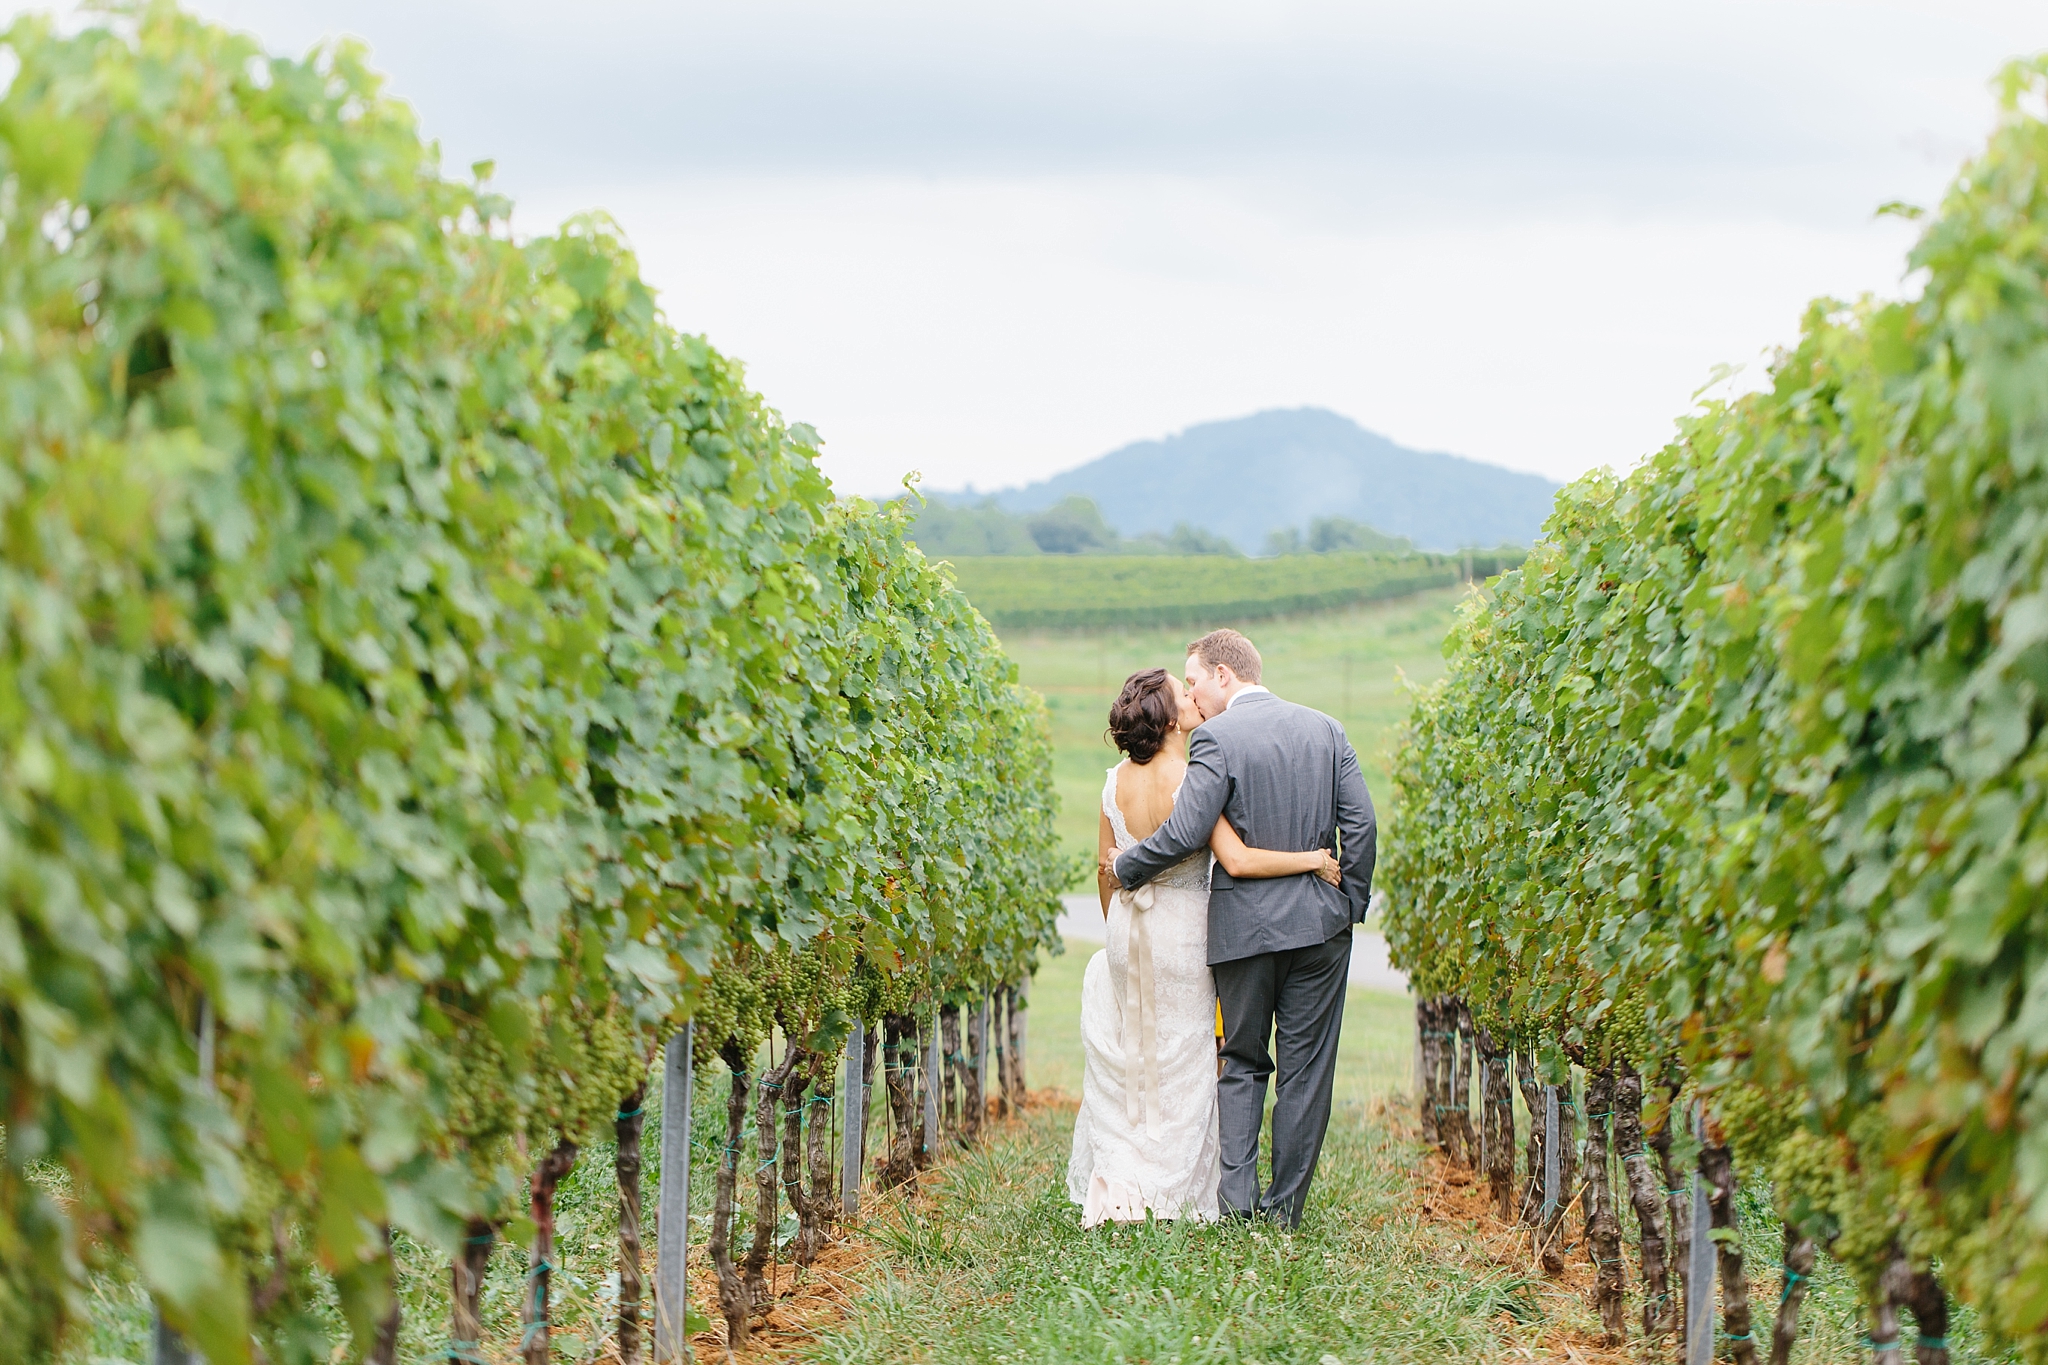 A romantic, classic wedding at Early Mountain Vineyard, in Orange, VA -- photographed by Alicia Lacey Photography, a Washington DC wedding photographer. 